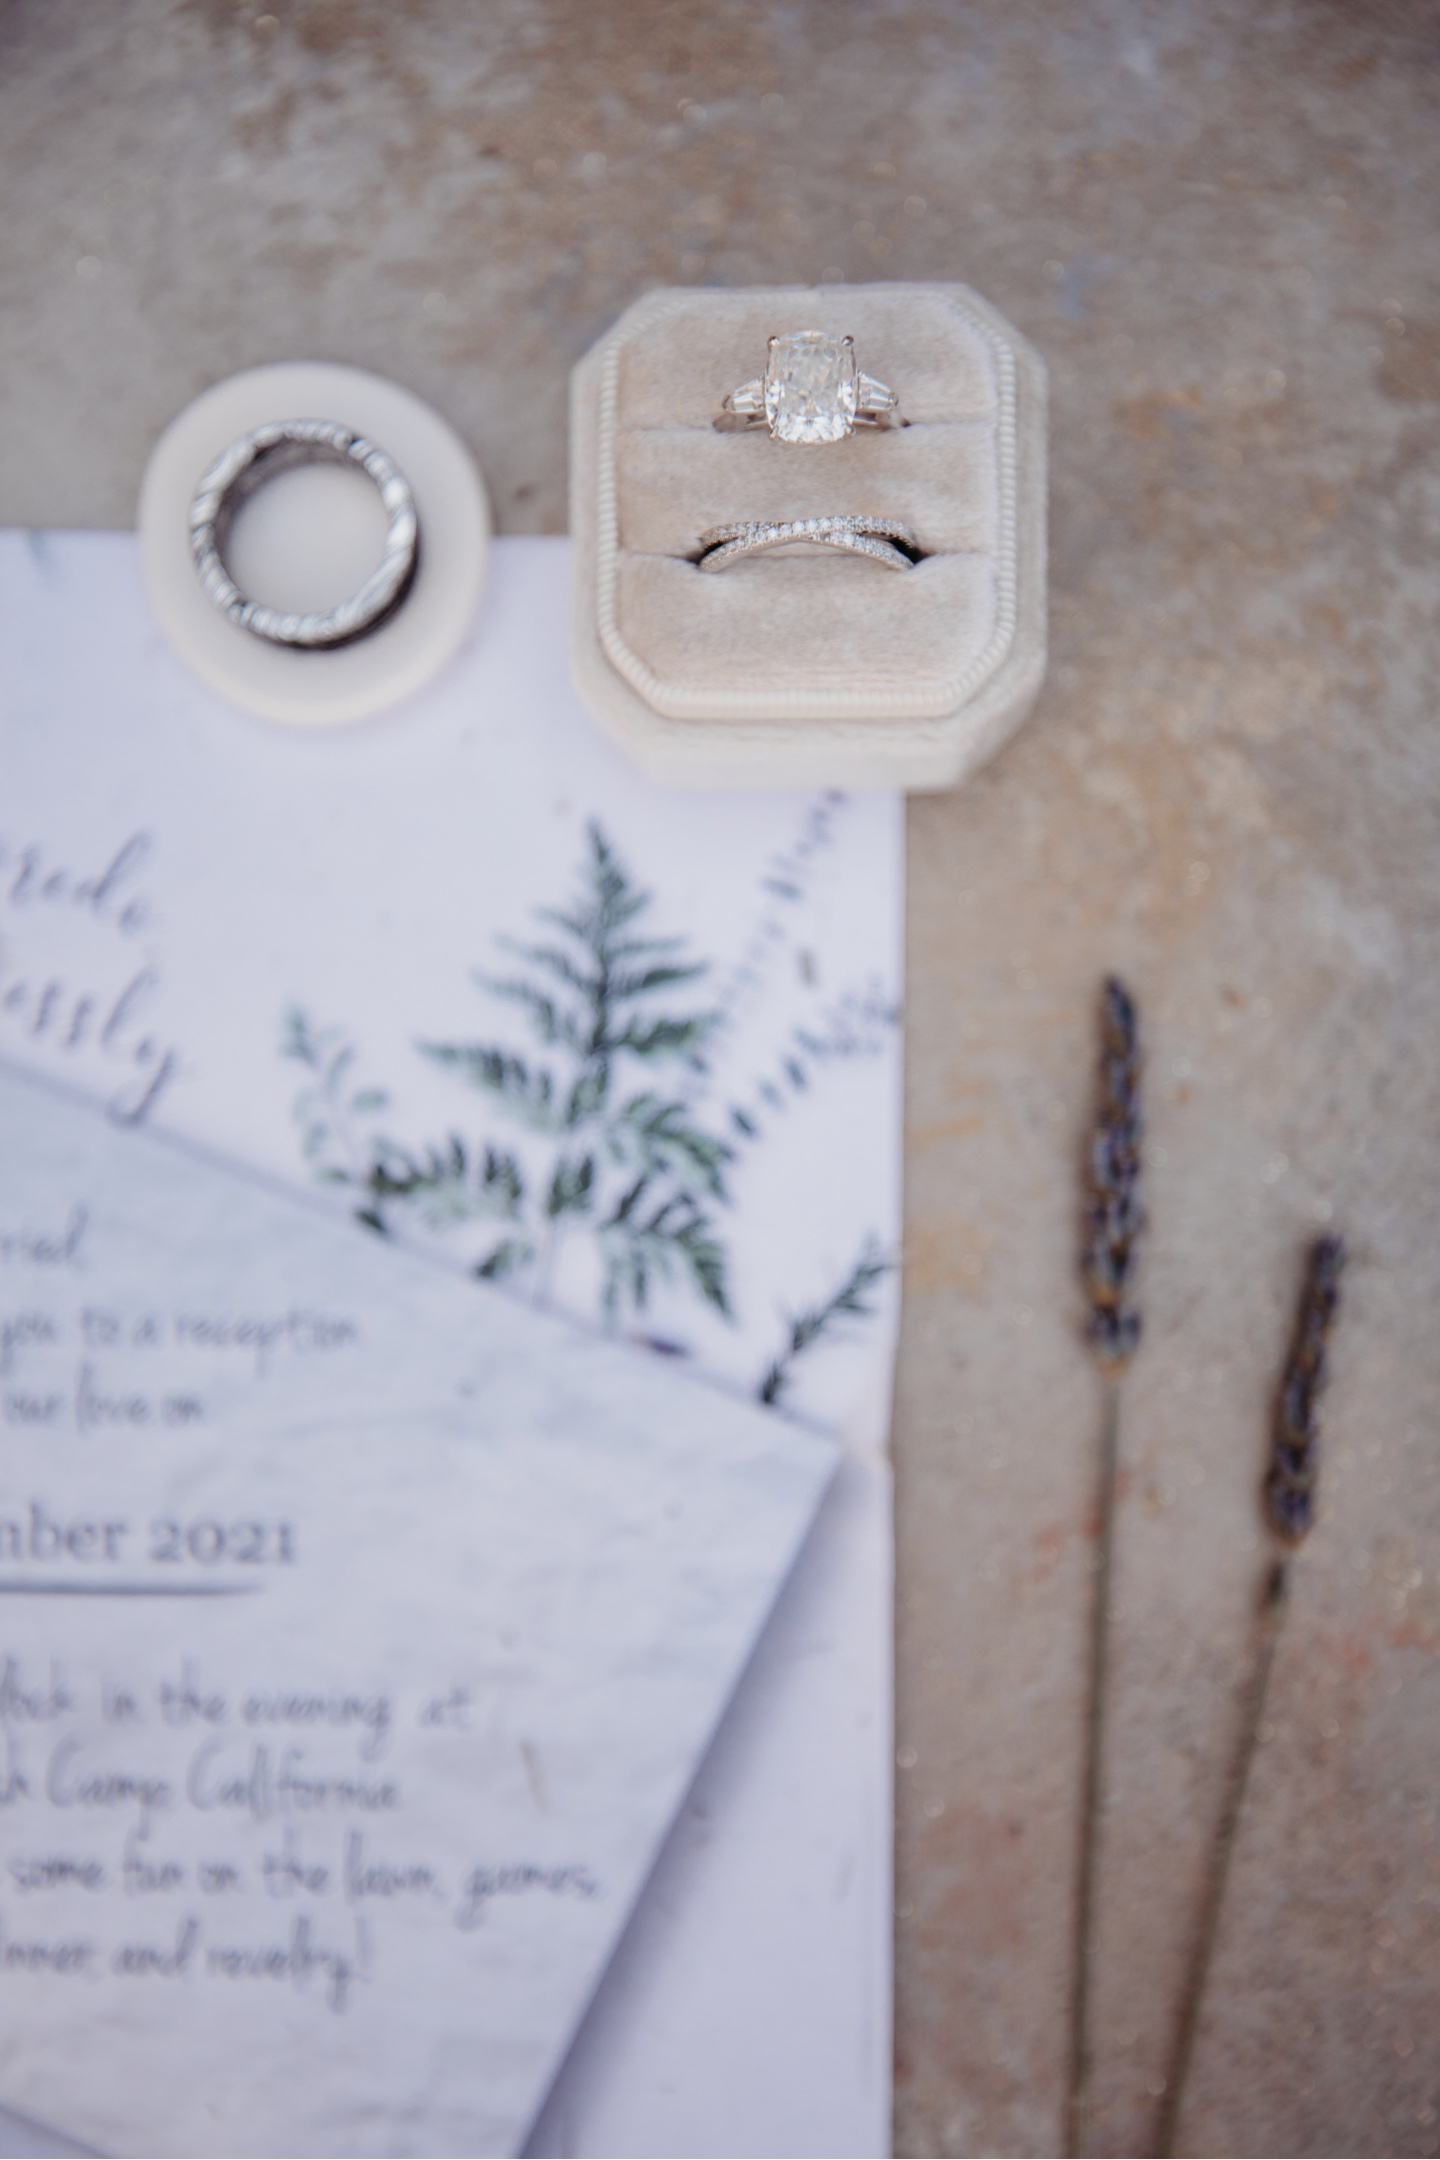 Wedding rings with wedding invitation and two sprigs of lavender